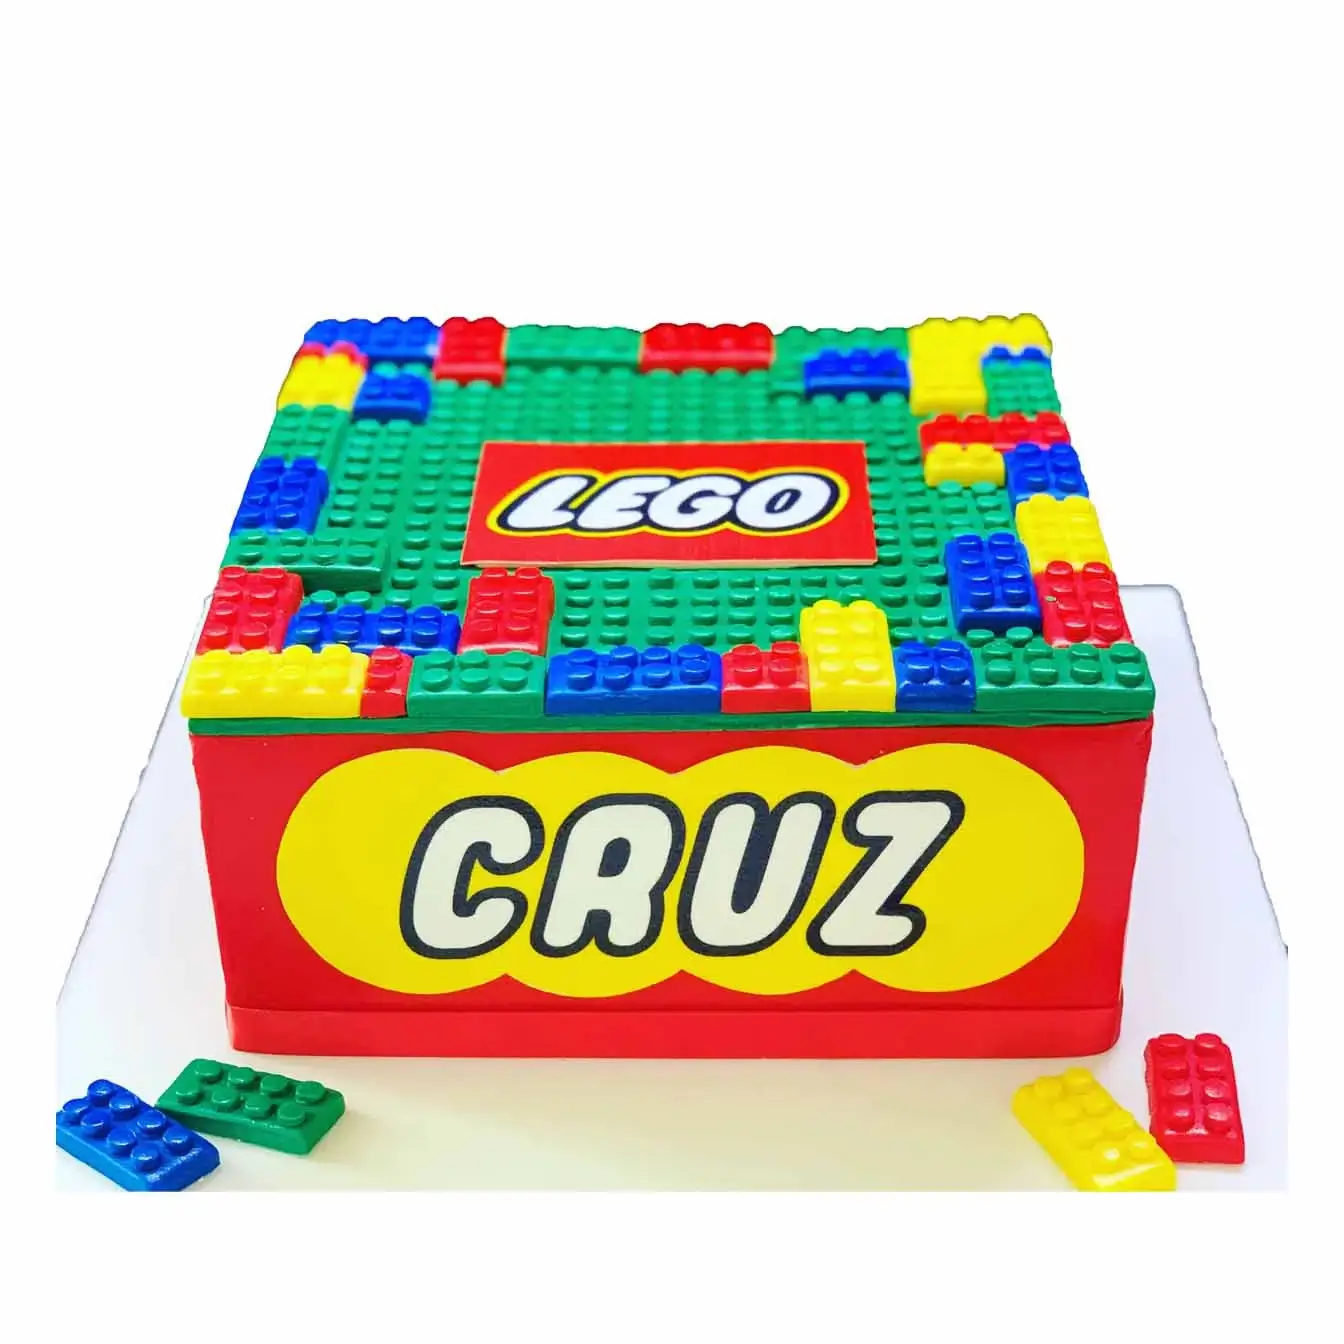 Lego Adventure Name Cake - A cake with a Lego board theme and the child's name in Lego font, a whimsical centerpiece for birthdays and celebrations filled with creativity.